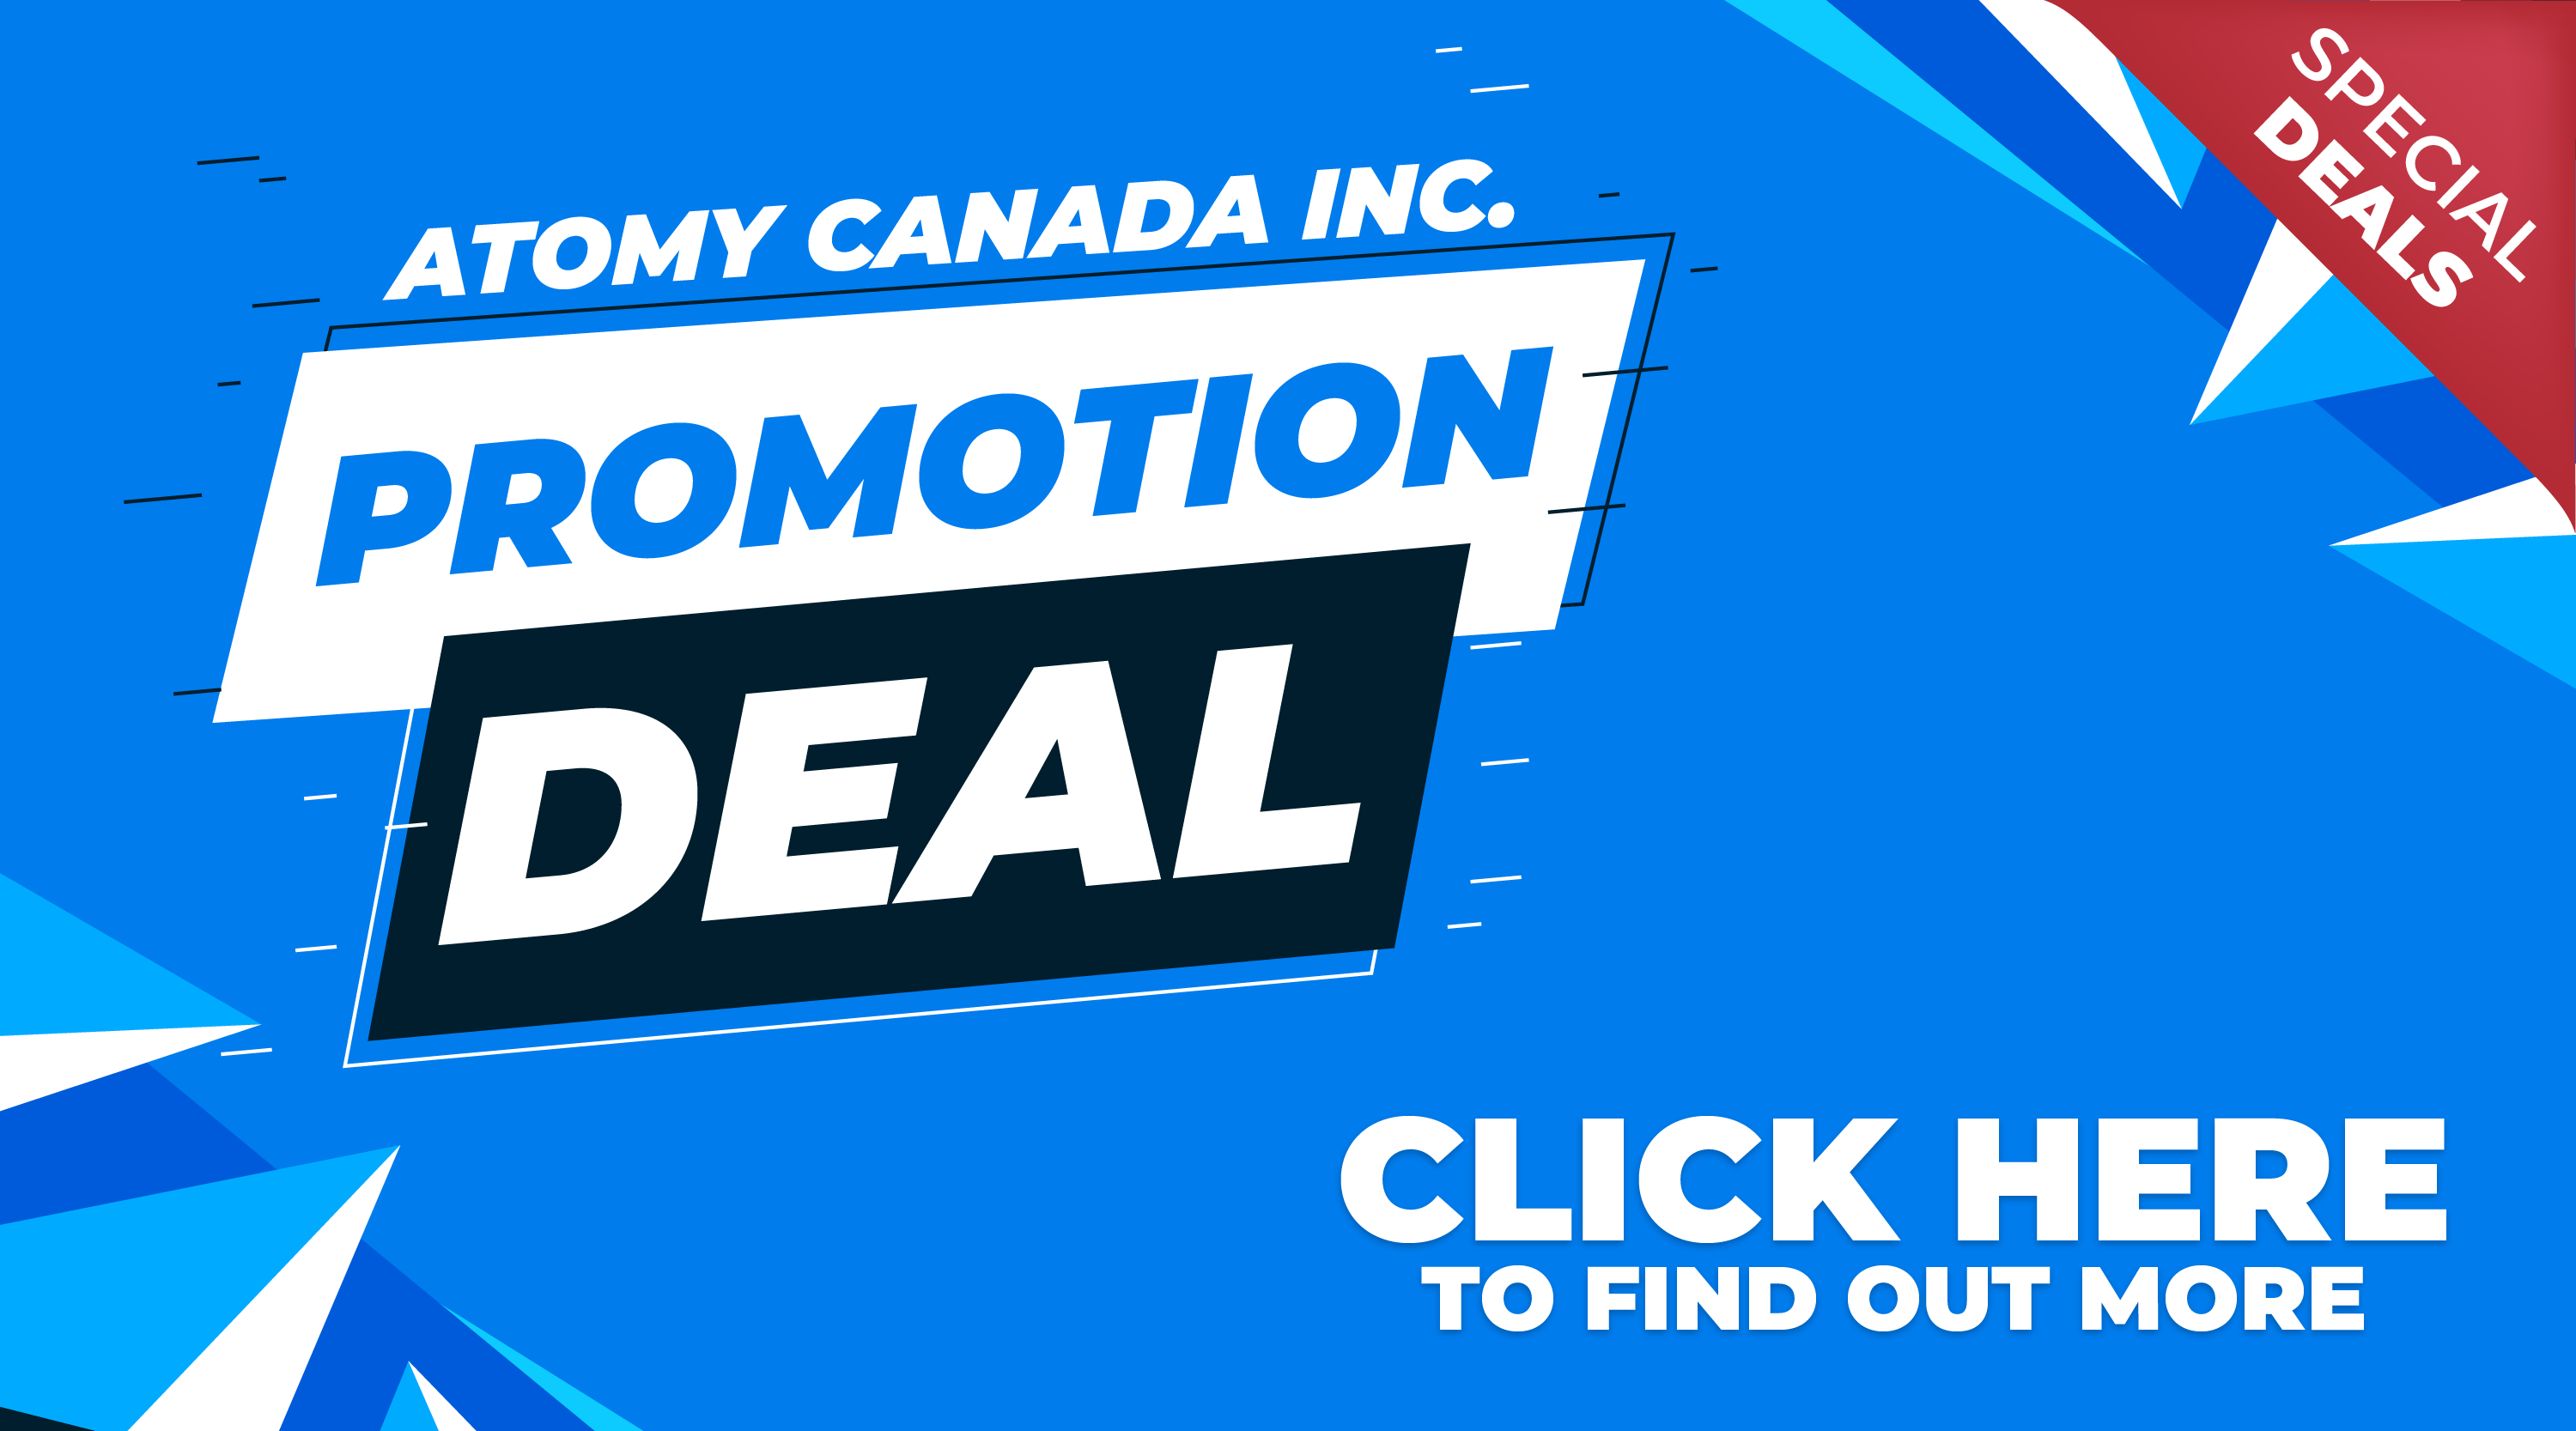 ATOMY CANADA PROMOTION DEAL BANNER